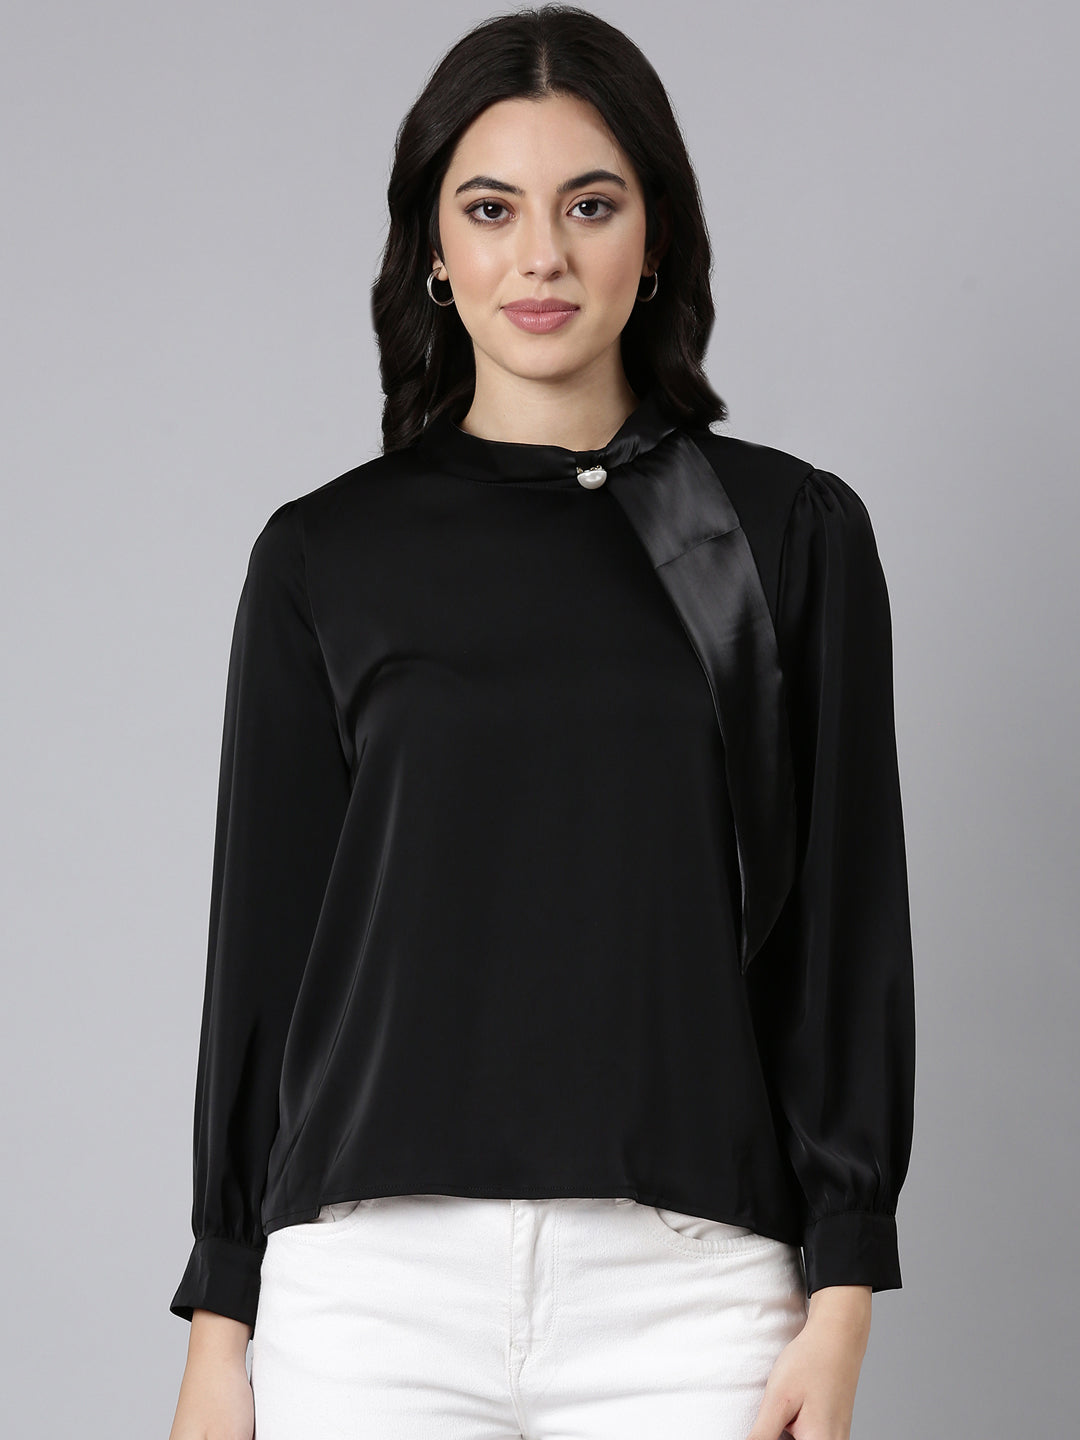 Women Solid Shirt Style Black Top